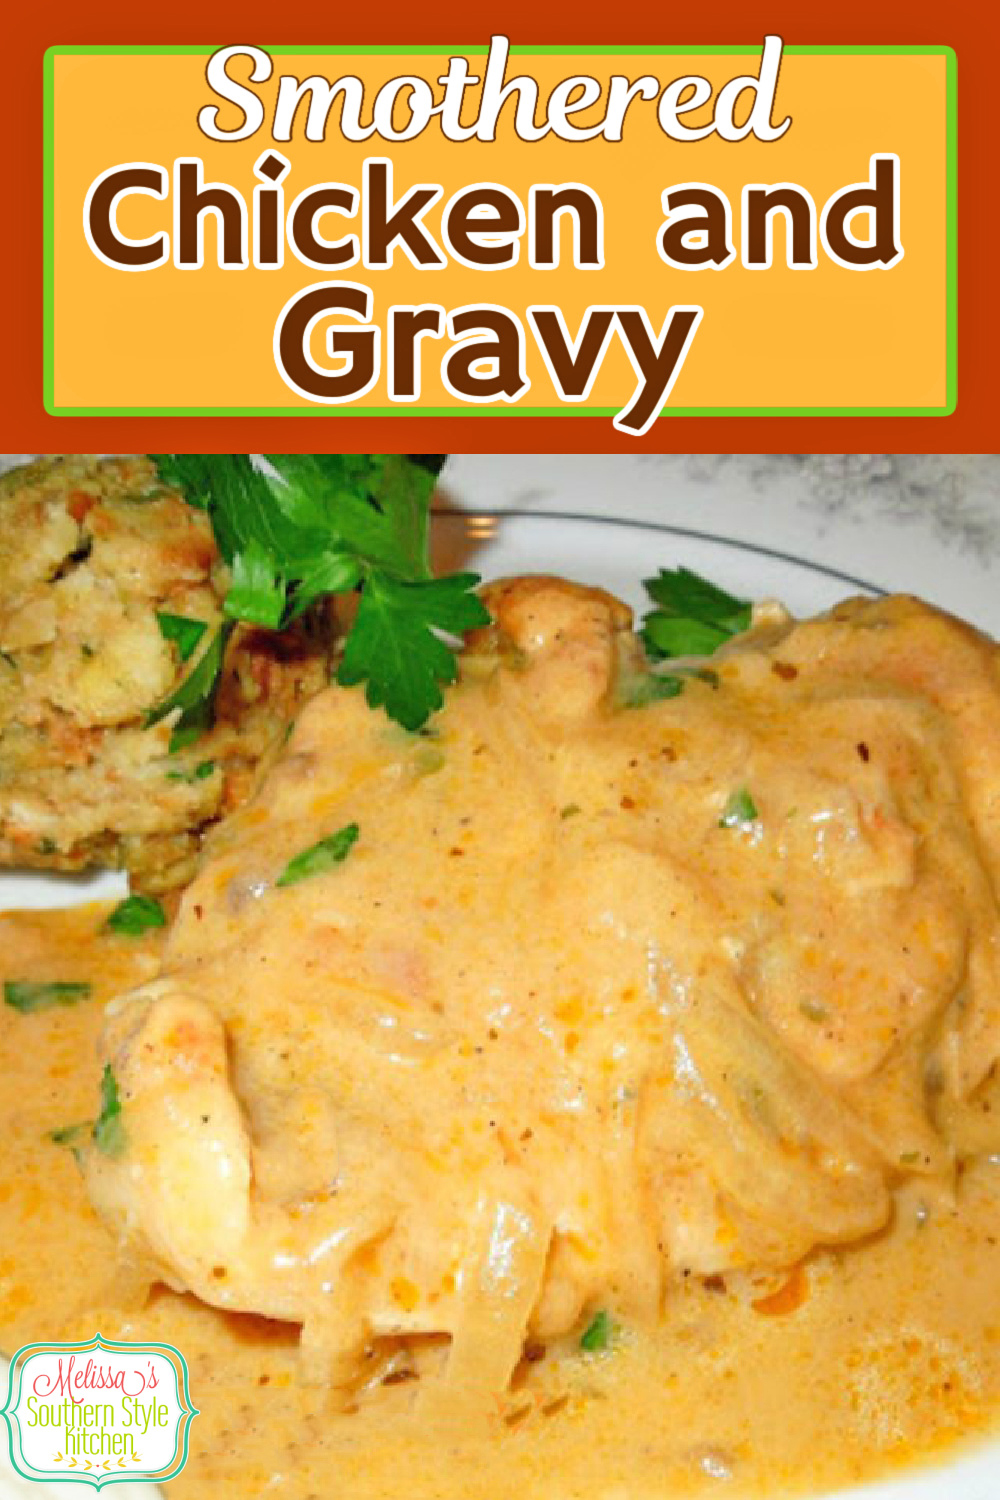 Serve this down home Smothered Chicken And Gravy with your favorite Southern sides #smotheredchicken #chickenandgravy #easychickenrecipes #chicken #chickenbreastrecipes #gravy #southernfriedchicken #roastchicken #chickengravy via @melissasssk